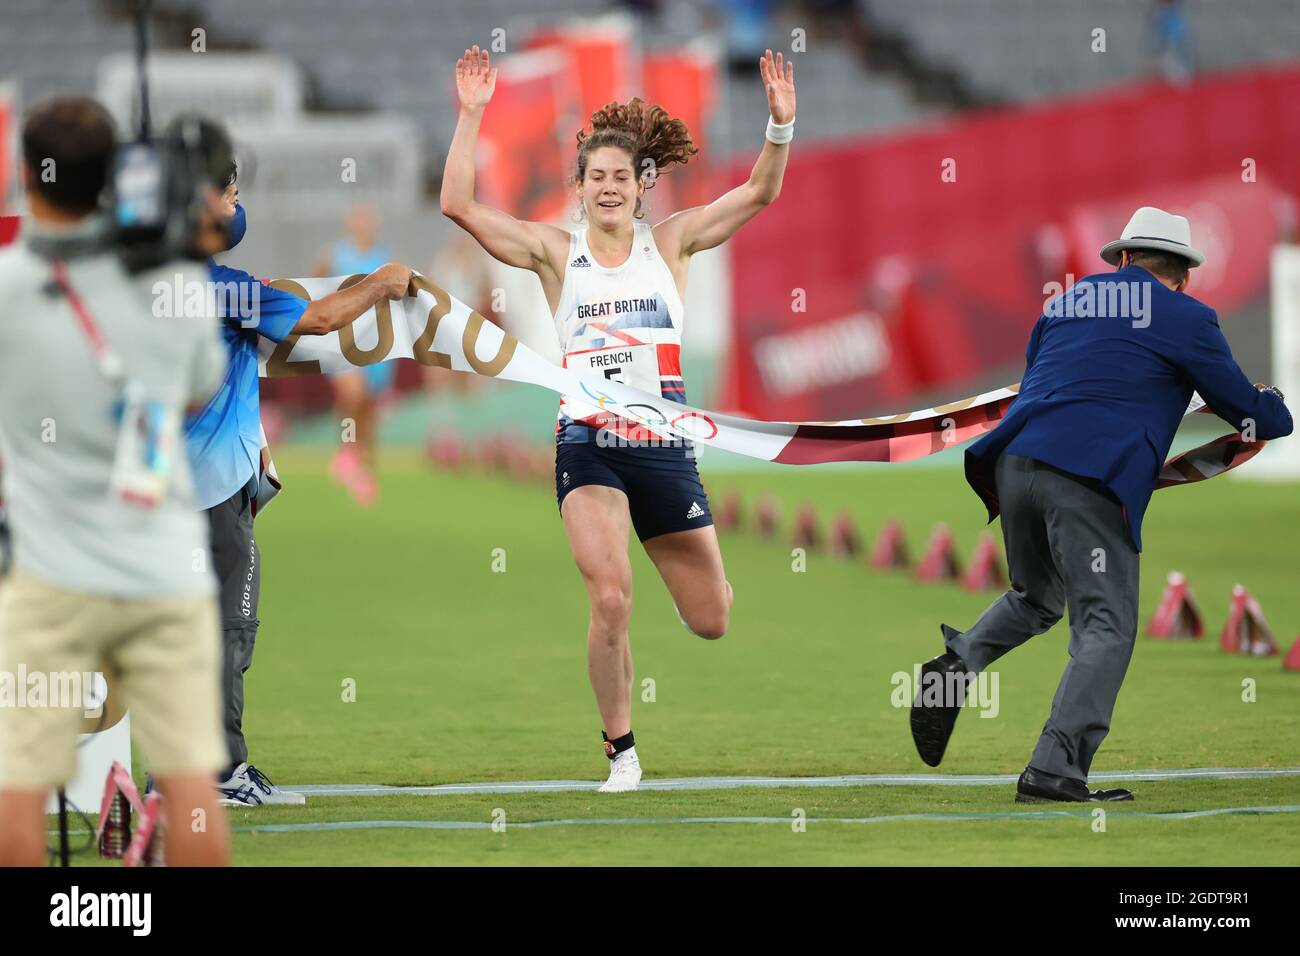 Tokyo, Japan. 5th Aug, 2021. Kate French (GBR) Modern Pentathlon : Women's Laser Run during the Tokyo 2020 Olympic Games at the Musashino Forest Sport Plaza in Tokyo, Japan . Credit: Yohei Osada/AFLO SPORT/Alamy Live News Stock Photo